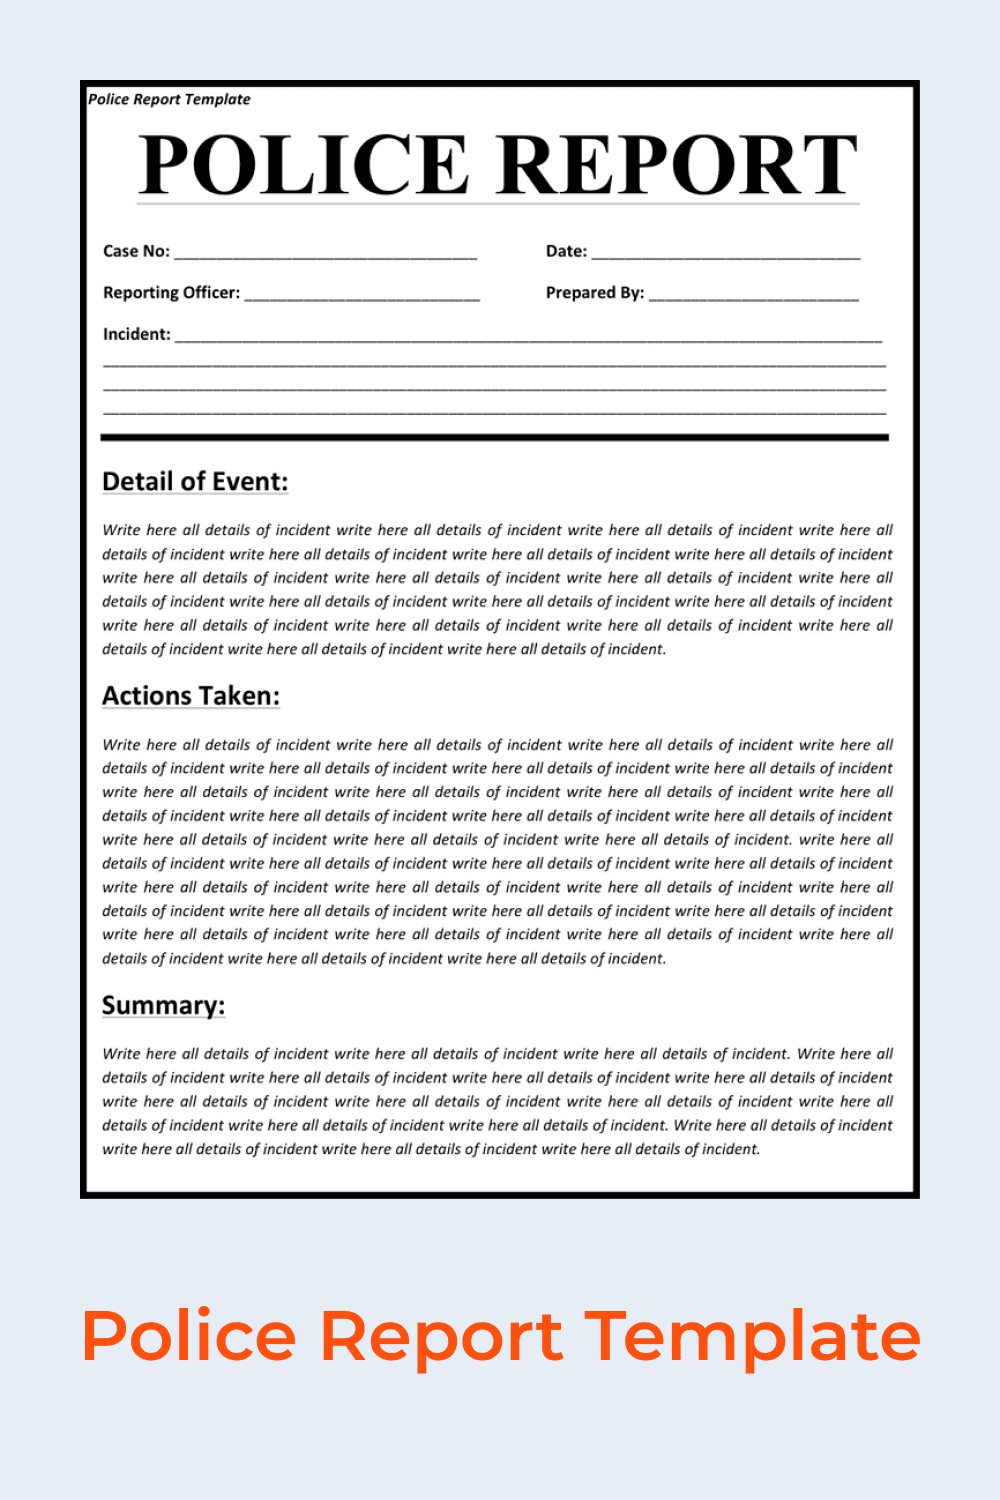 Police Report Template.